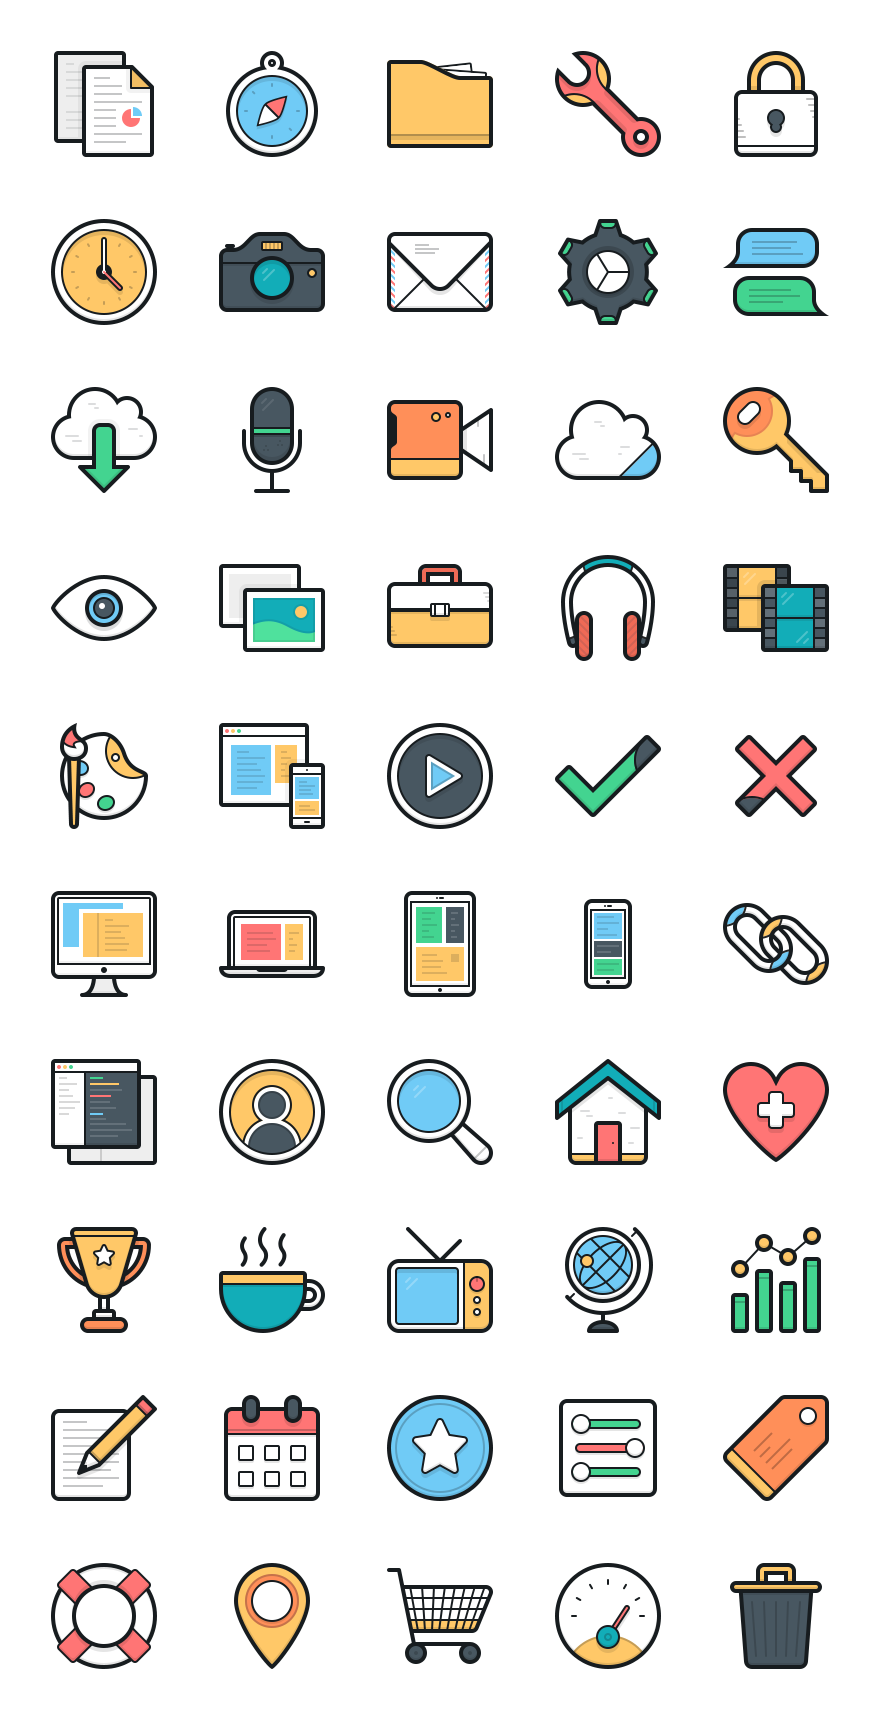 FREE Icon Pack by Layerform Design Co